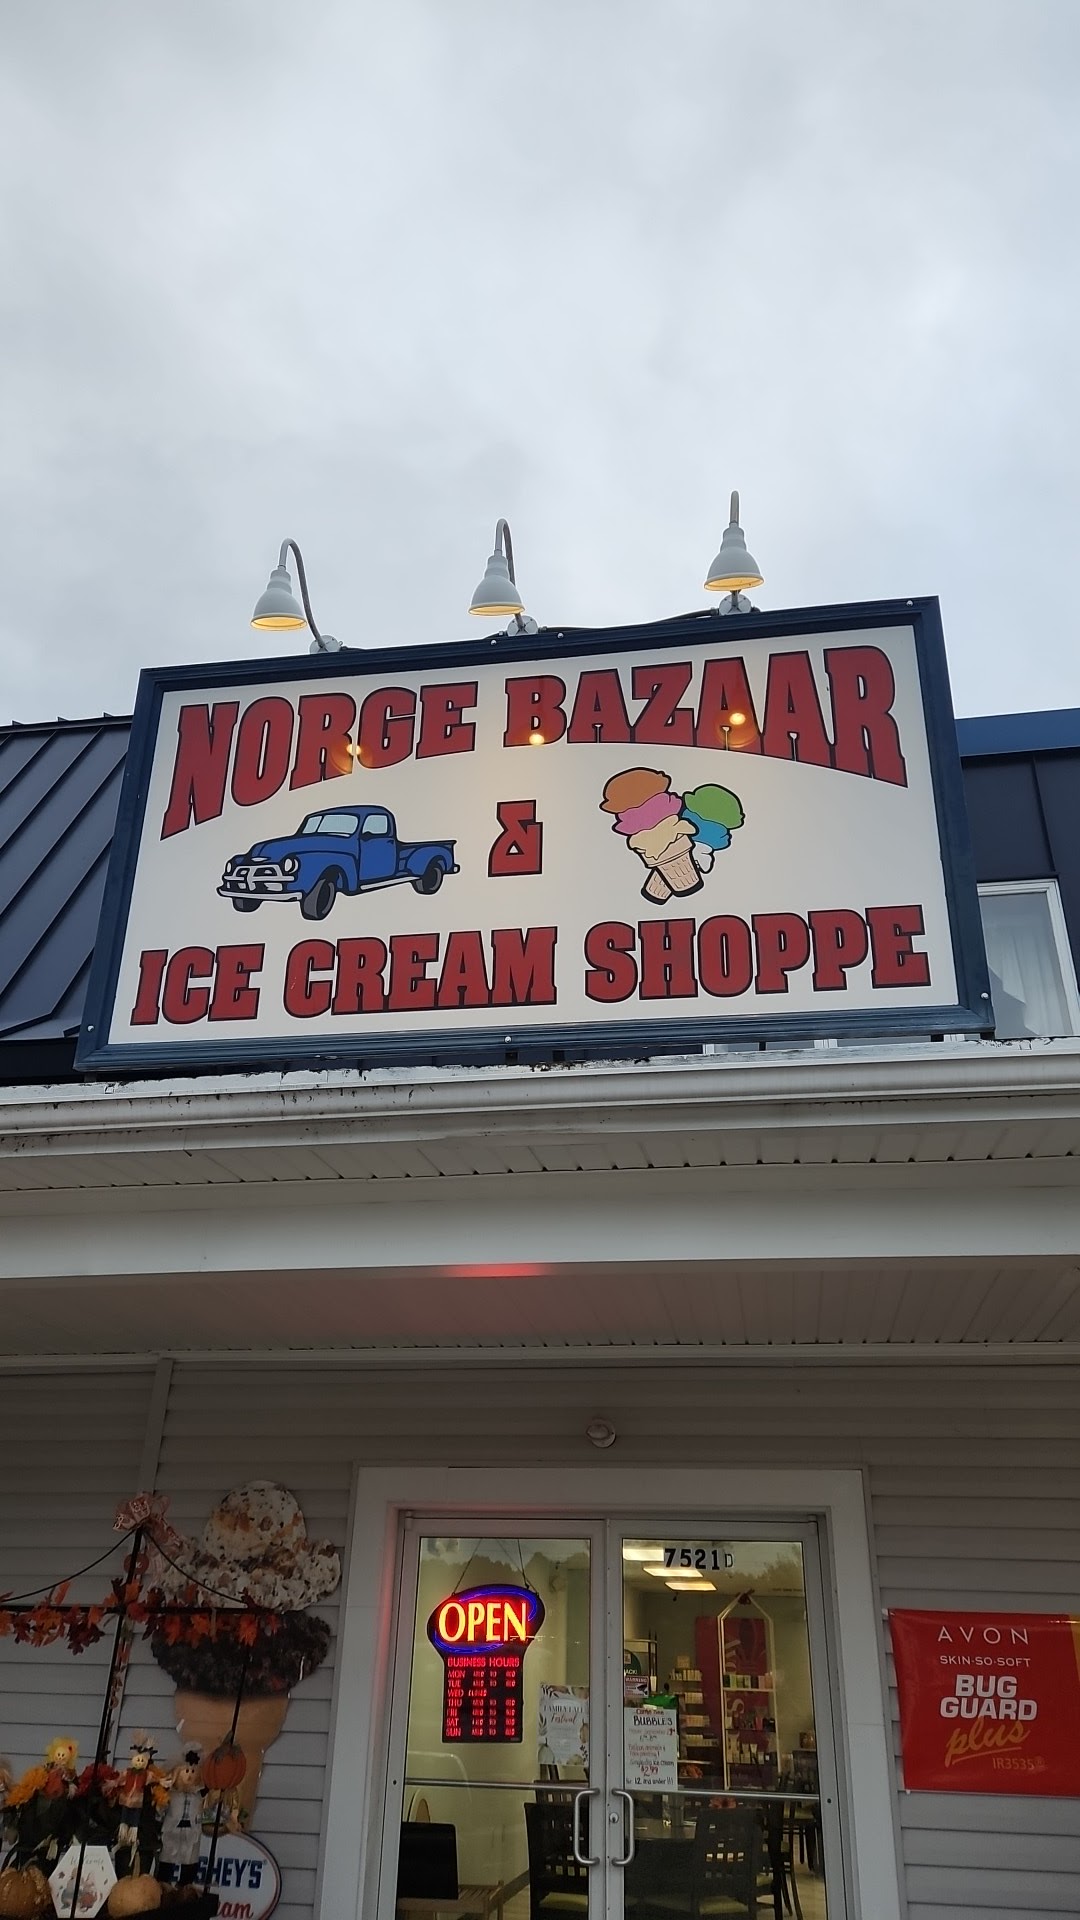 Norge Bazaar, Ice Cream Shoppe and Dawg House and Sub Shoppe